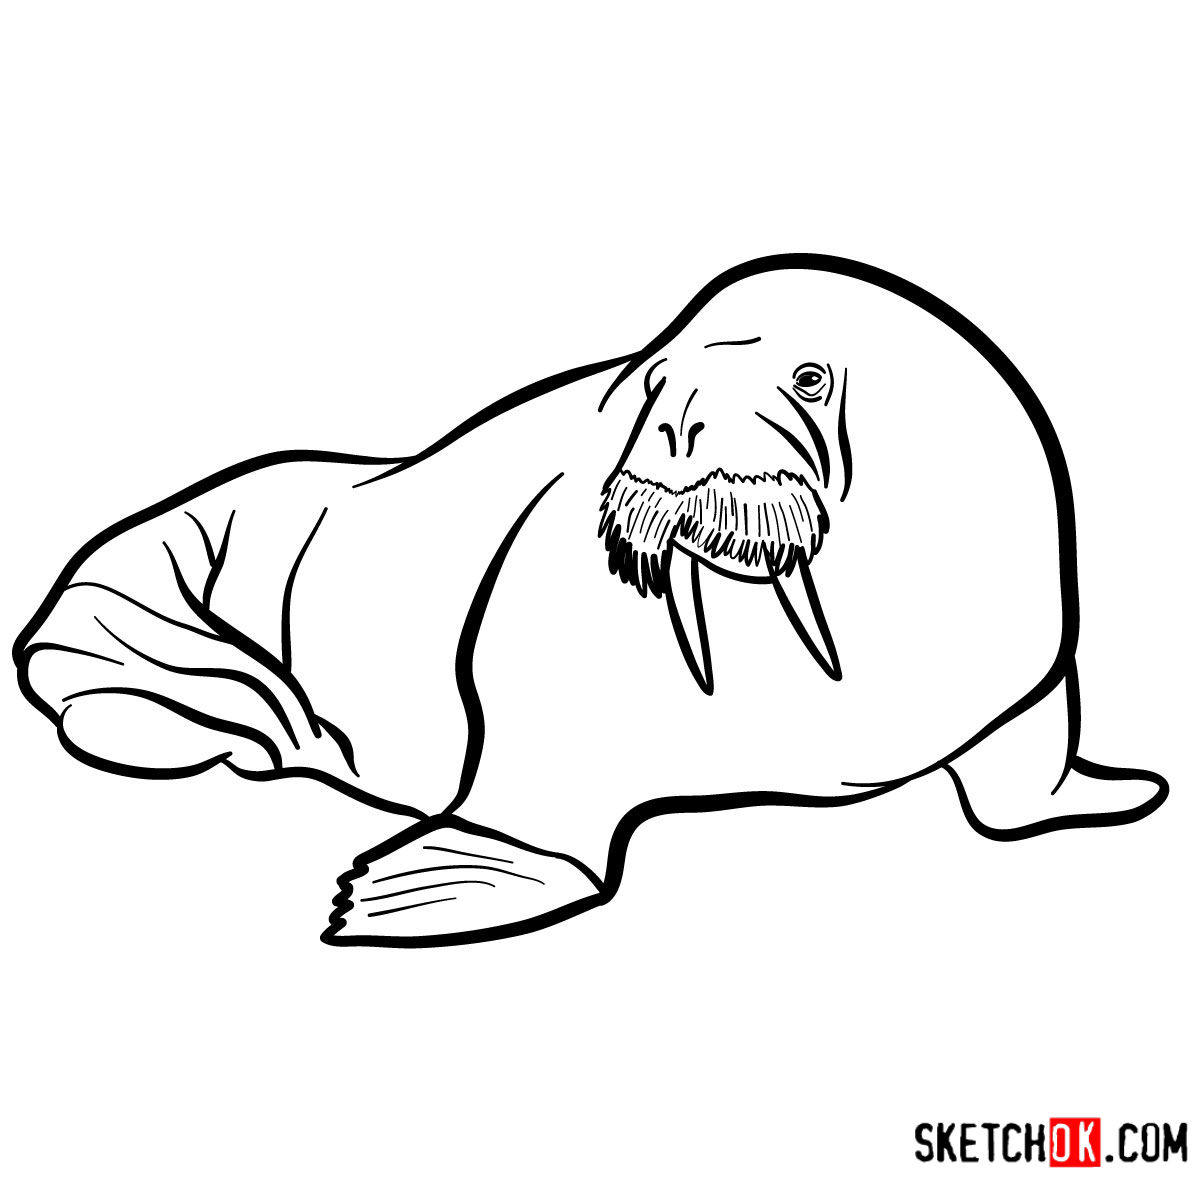 How to draw a Walrus